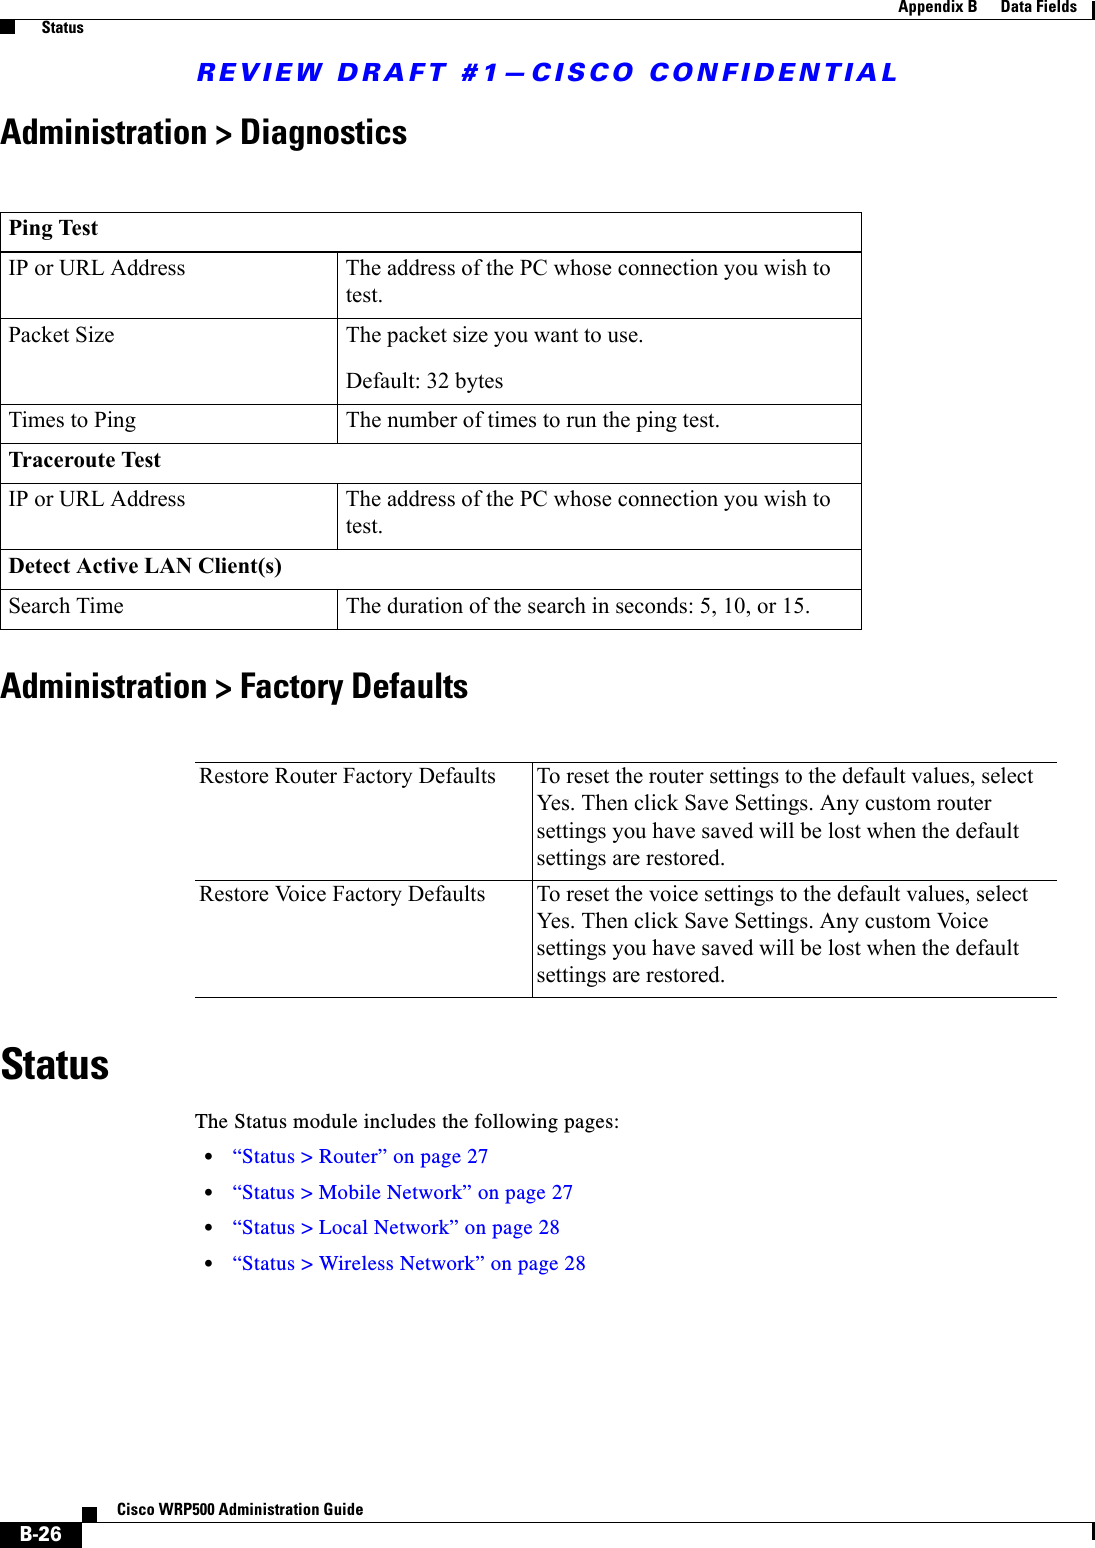 REVIEW DRAFT #1—CISCO CONFIDENTIALB-26Cisco WRP500 Administration Guide Appendix B      Data Fields  StatusAdministration &gt; DiagnosticsAdministration &gt; Factory DefaultsStatusThe Status module includes the following pages:•“Status &gt; Router” on page 27•“Status &gt; Mobile Network” on page 27•“Status &gt; Local Network” on page 28•“Status &gt; Wireless Network” on page 28Ping TestIP or URL Address The address of the PC whose connection you wish to test.Packet Size The packet size you want to use. Default: 32 bytesTimes to Ping The number of times to run the ping test.Traceroute TestIP or URL Address The address of the PC whose connection you wish to test.Detect Active LAN Client(s)Search Time The duration of the search in seconds: 5, 10, or 15.Restore Router Factory Defaults To reset the router settings to the default values, select Yes. Then click Save Settings. Any custom router settings you have saved will be lost when the default settings are restored.Restore Voice Factory Defaults To reset the voice settings to the default values, select Yes. Then click Save Settings. Any custom Voice settings you have saved will be lost when the default settings are restored.